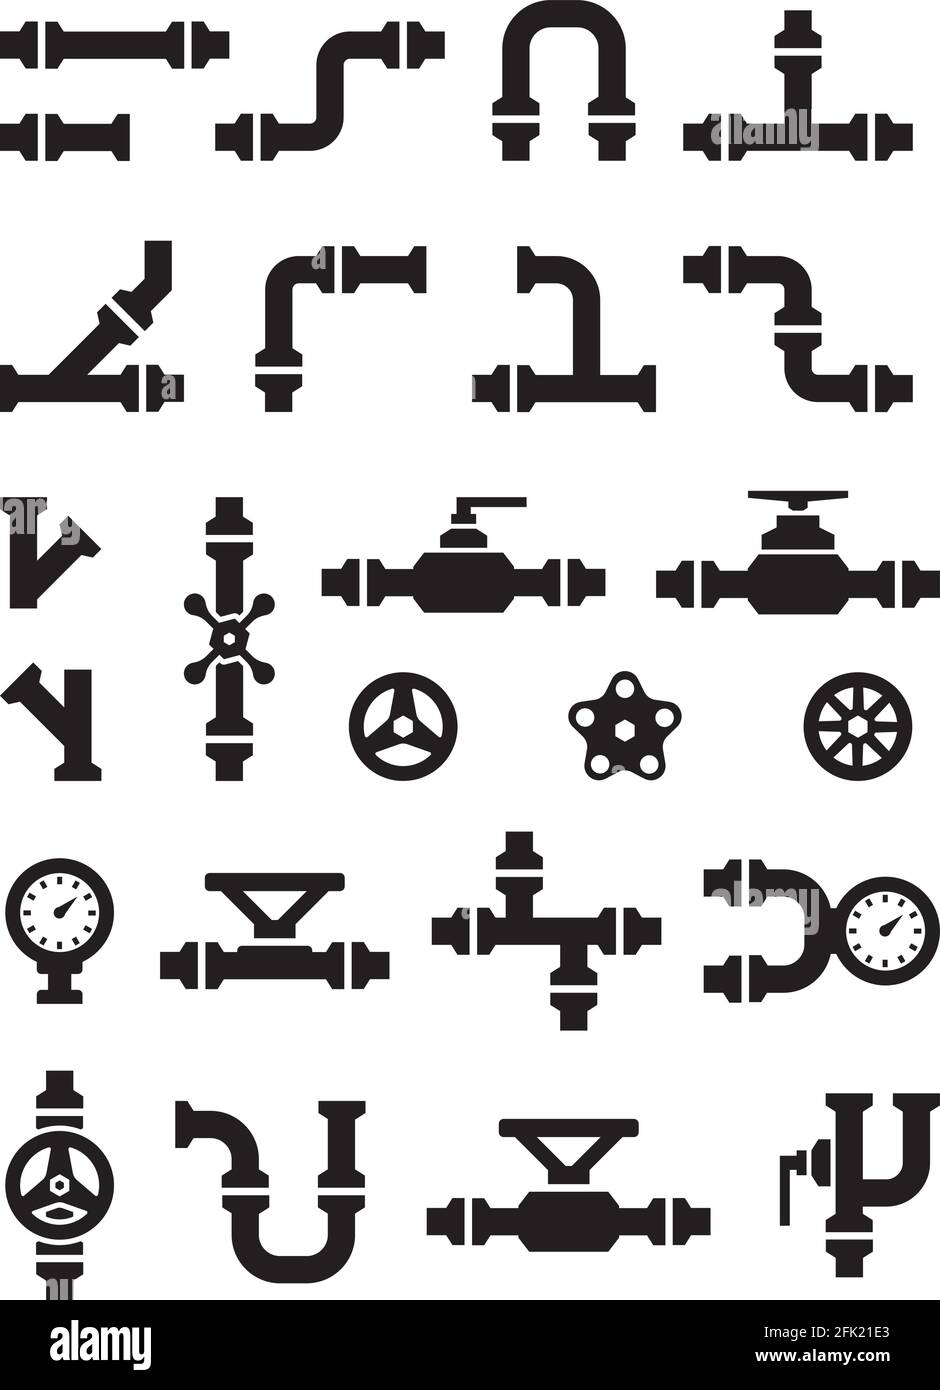 Pipe symbols. Gas or water pipelines steam pressure counters faucets switches for sanitary engineering vector Stock Vector